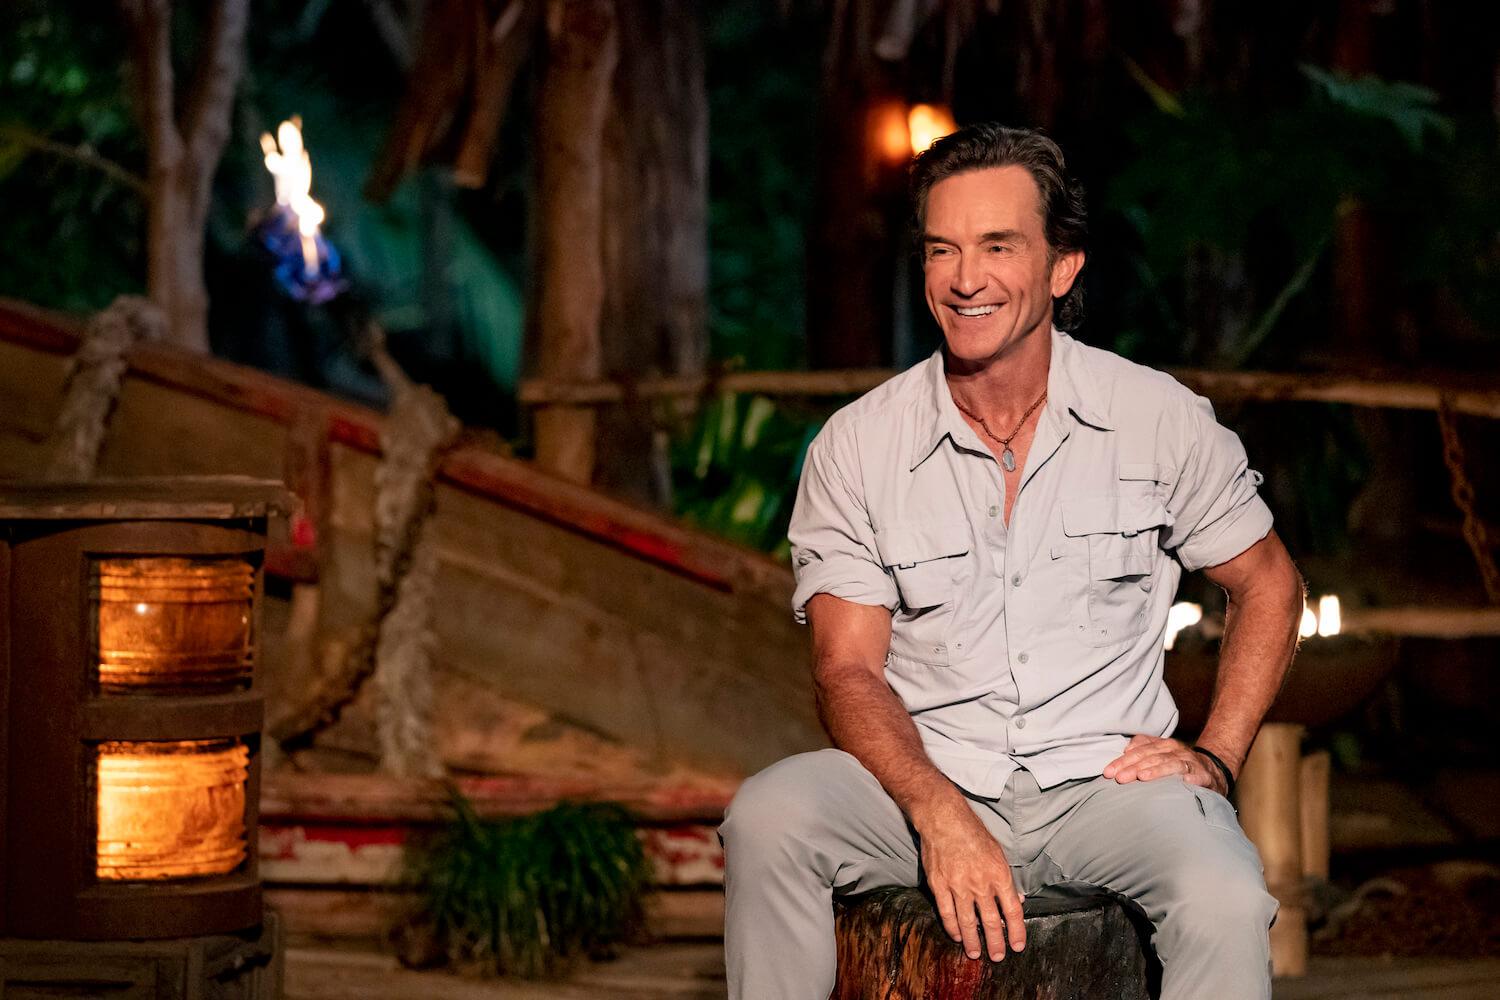 Jeff Probst from